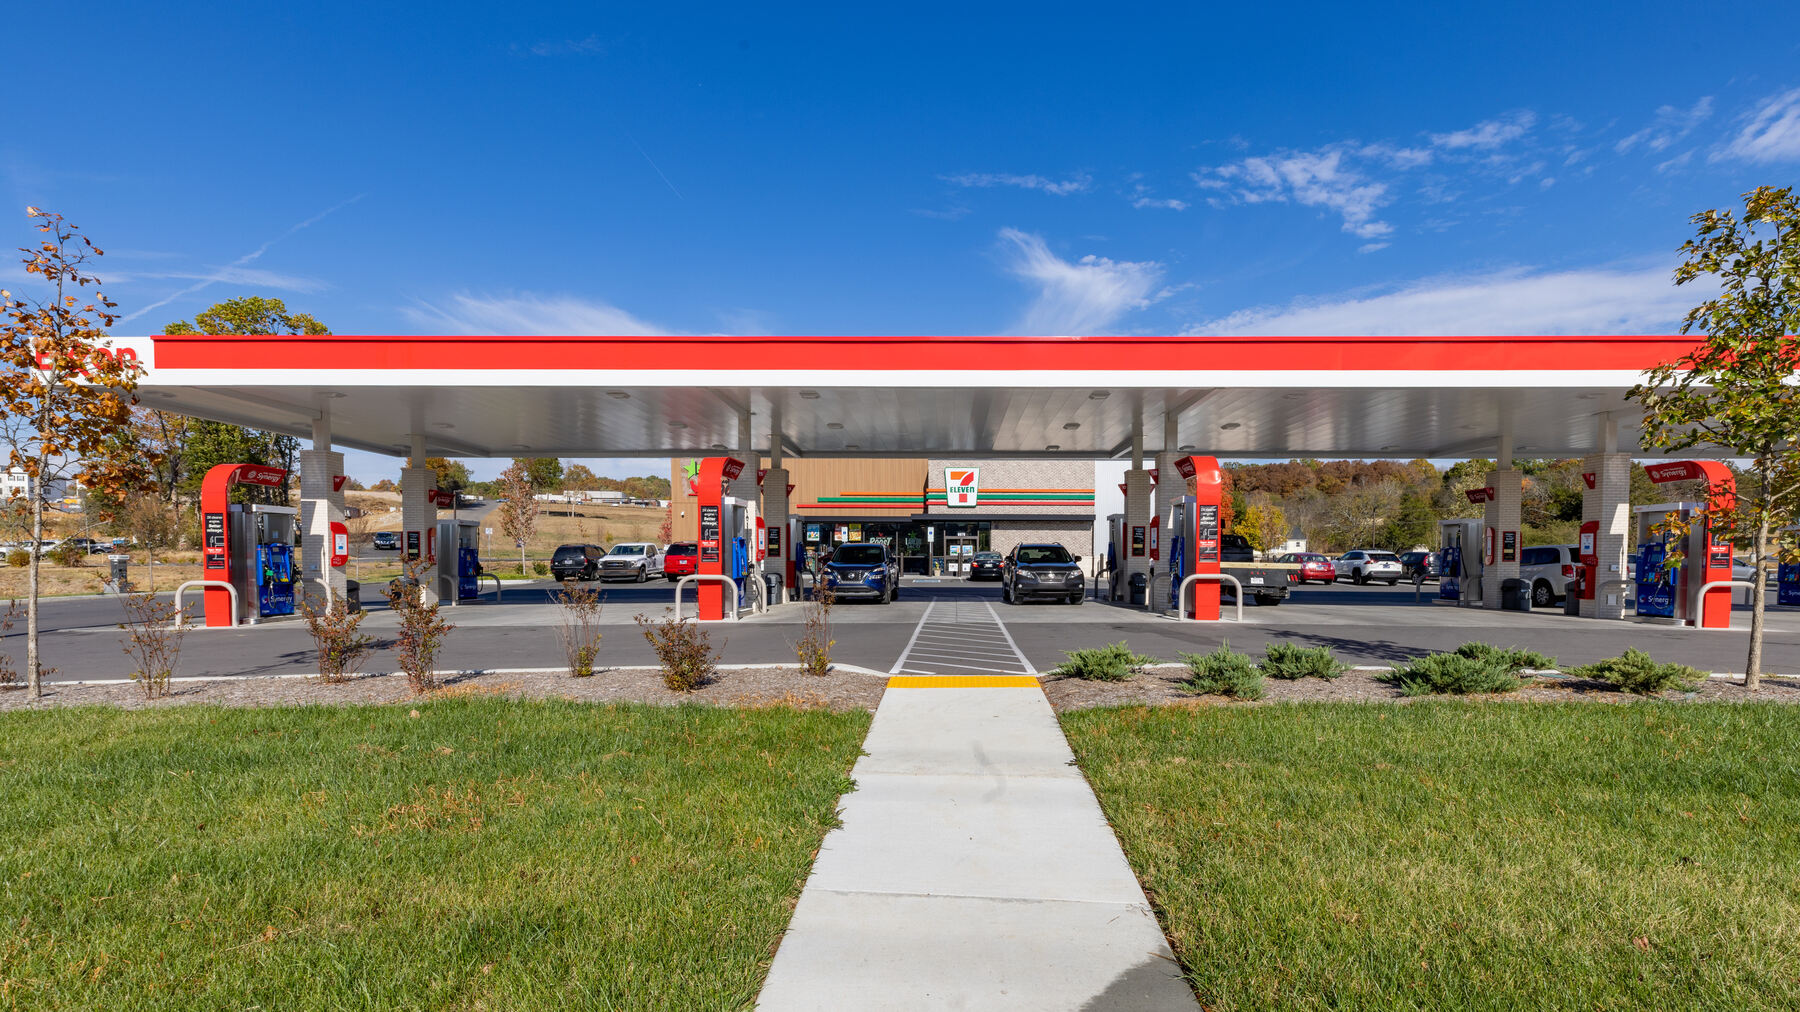 A 7-Eleven gas station with grass and landscape in front